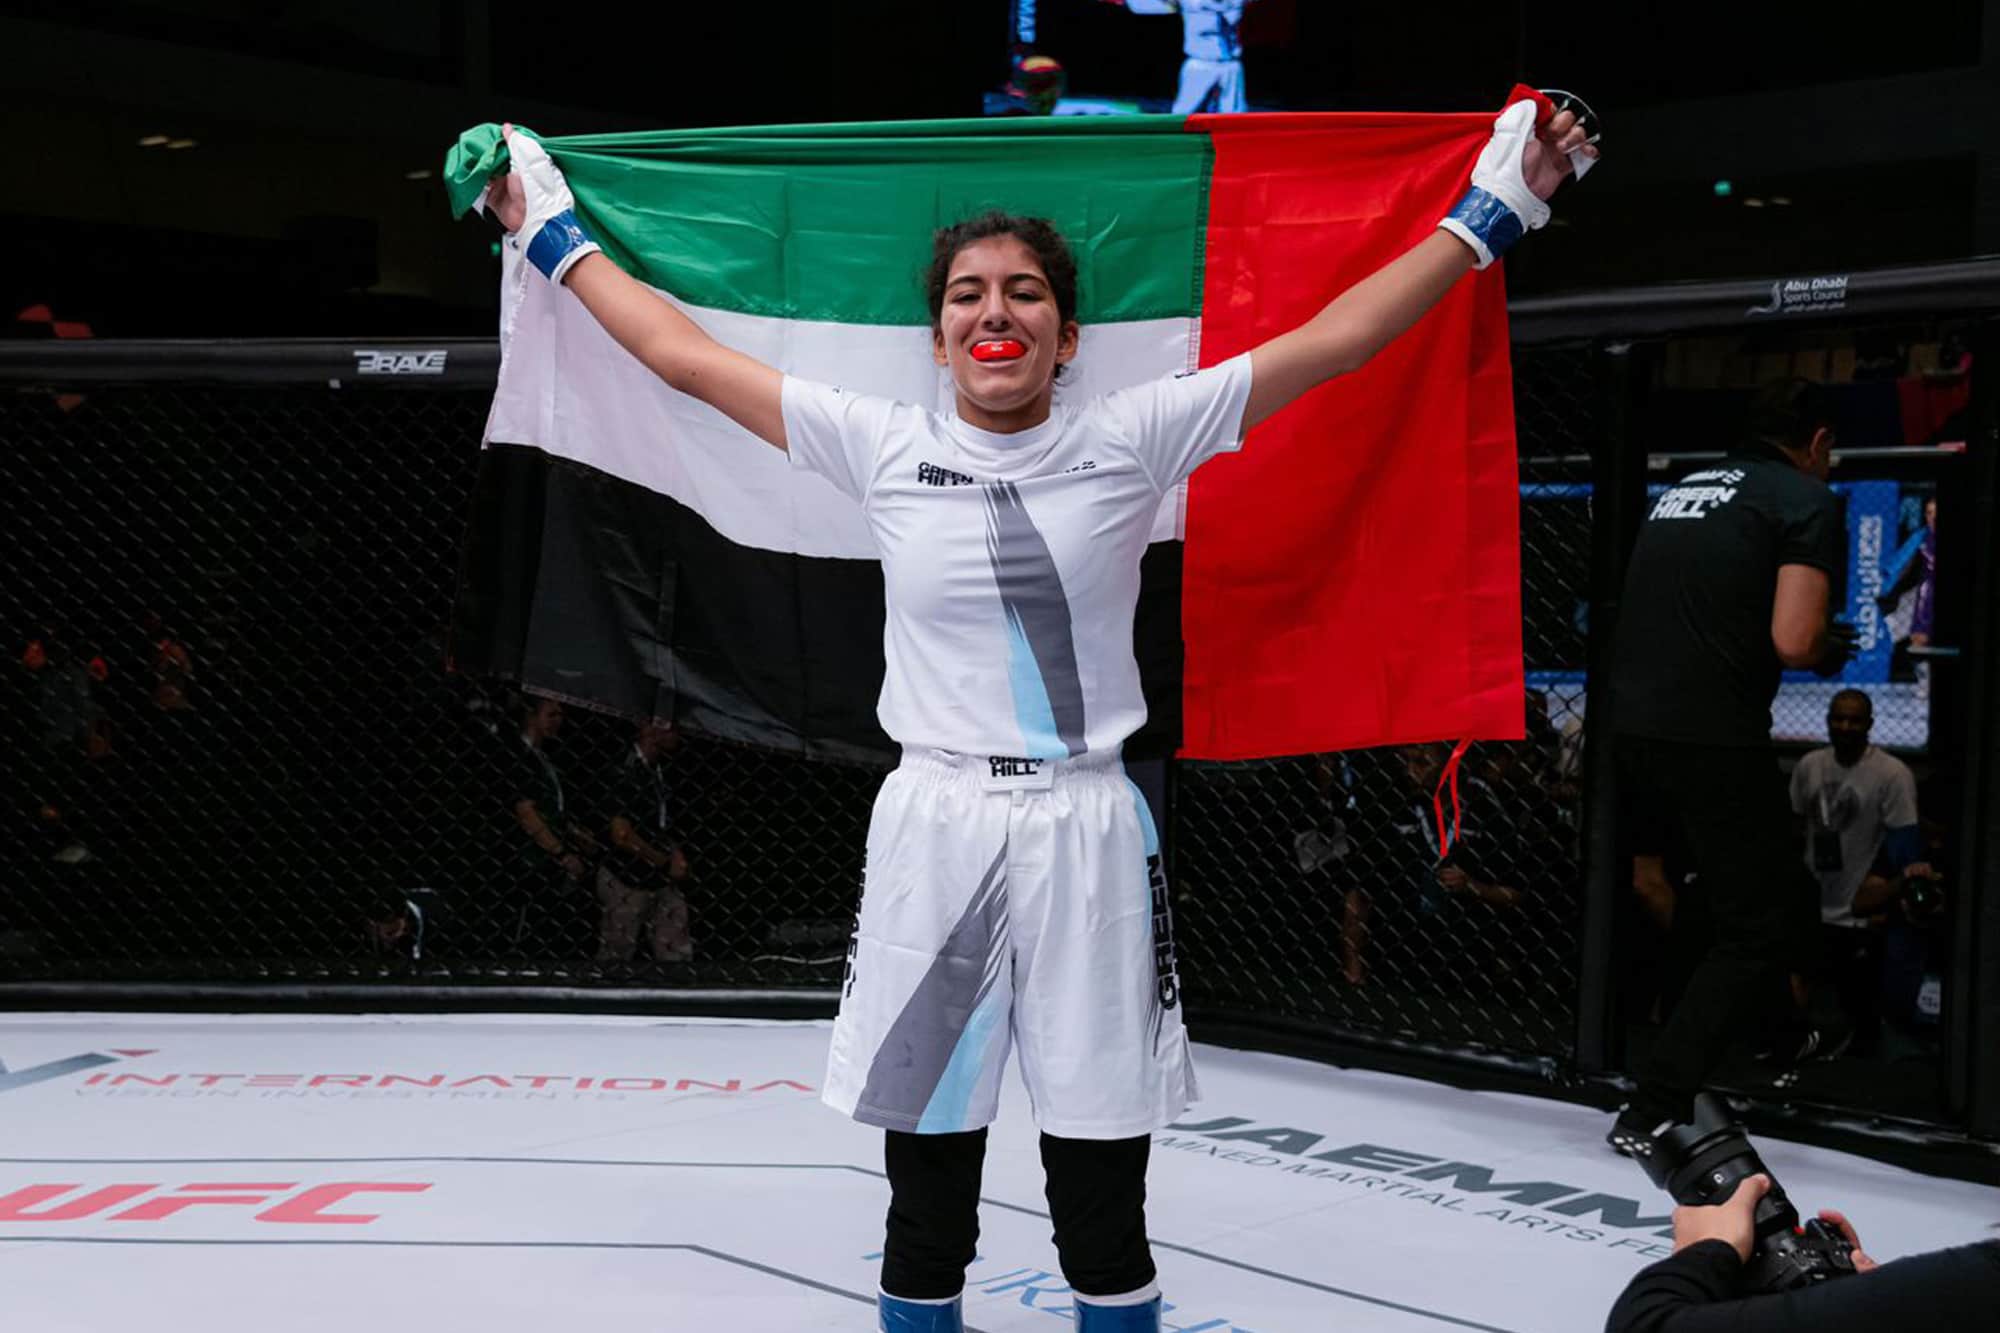 Zamzam Al Hammadi becomes UAE’s first female Youth World Champion & Olekseii Bolbochan claims second gold medal – 2023 Youth World Championships Day 2